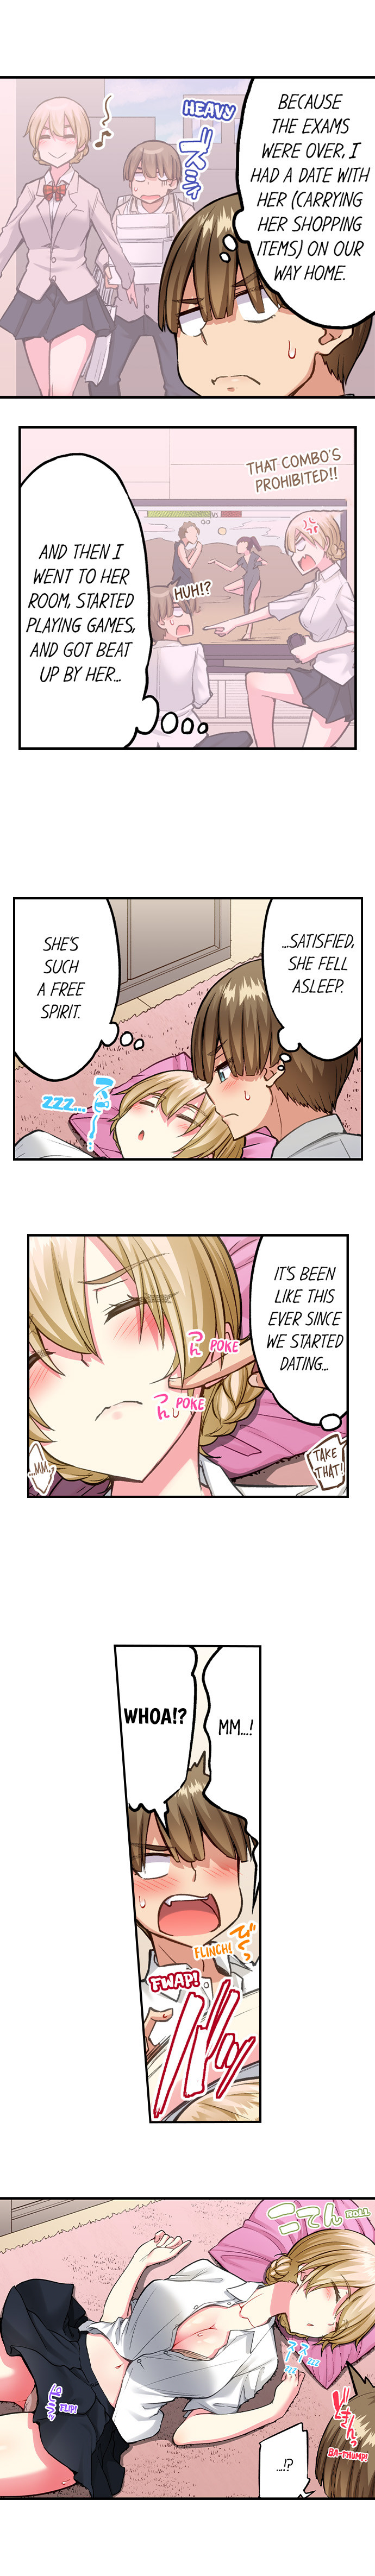 Traditional Job of Washing Girls’ Body - Chapter 204 Page 7